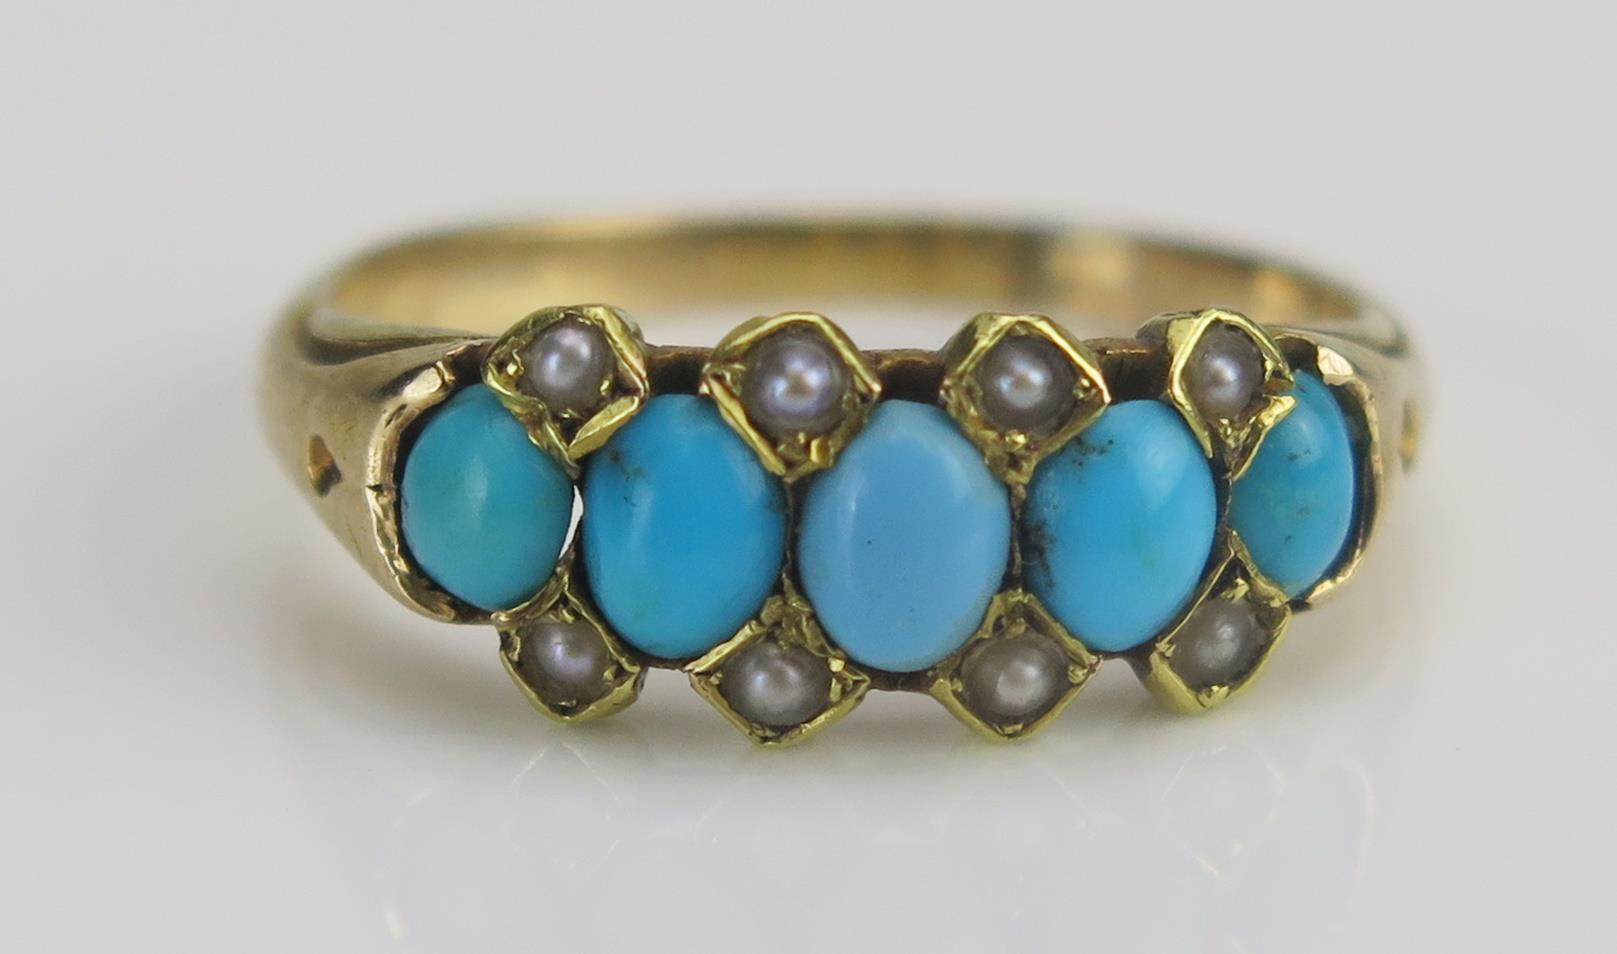 A Victorian Turquoise and Seed Pearl or Cultured Seed Pearl Ring in a precious yellow metal setting,